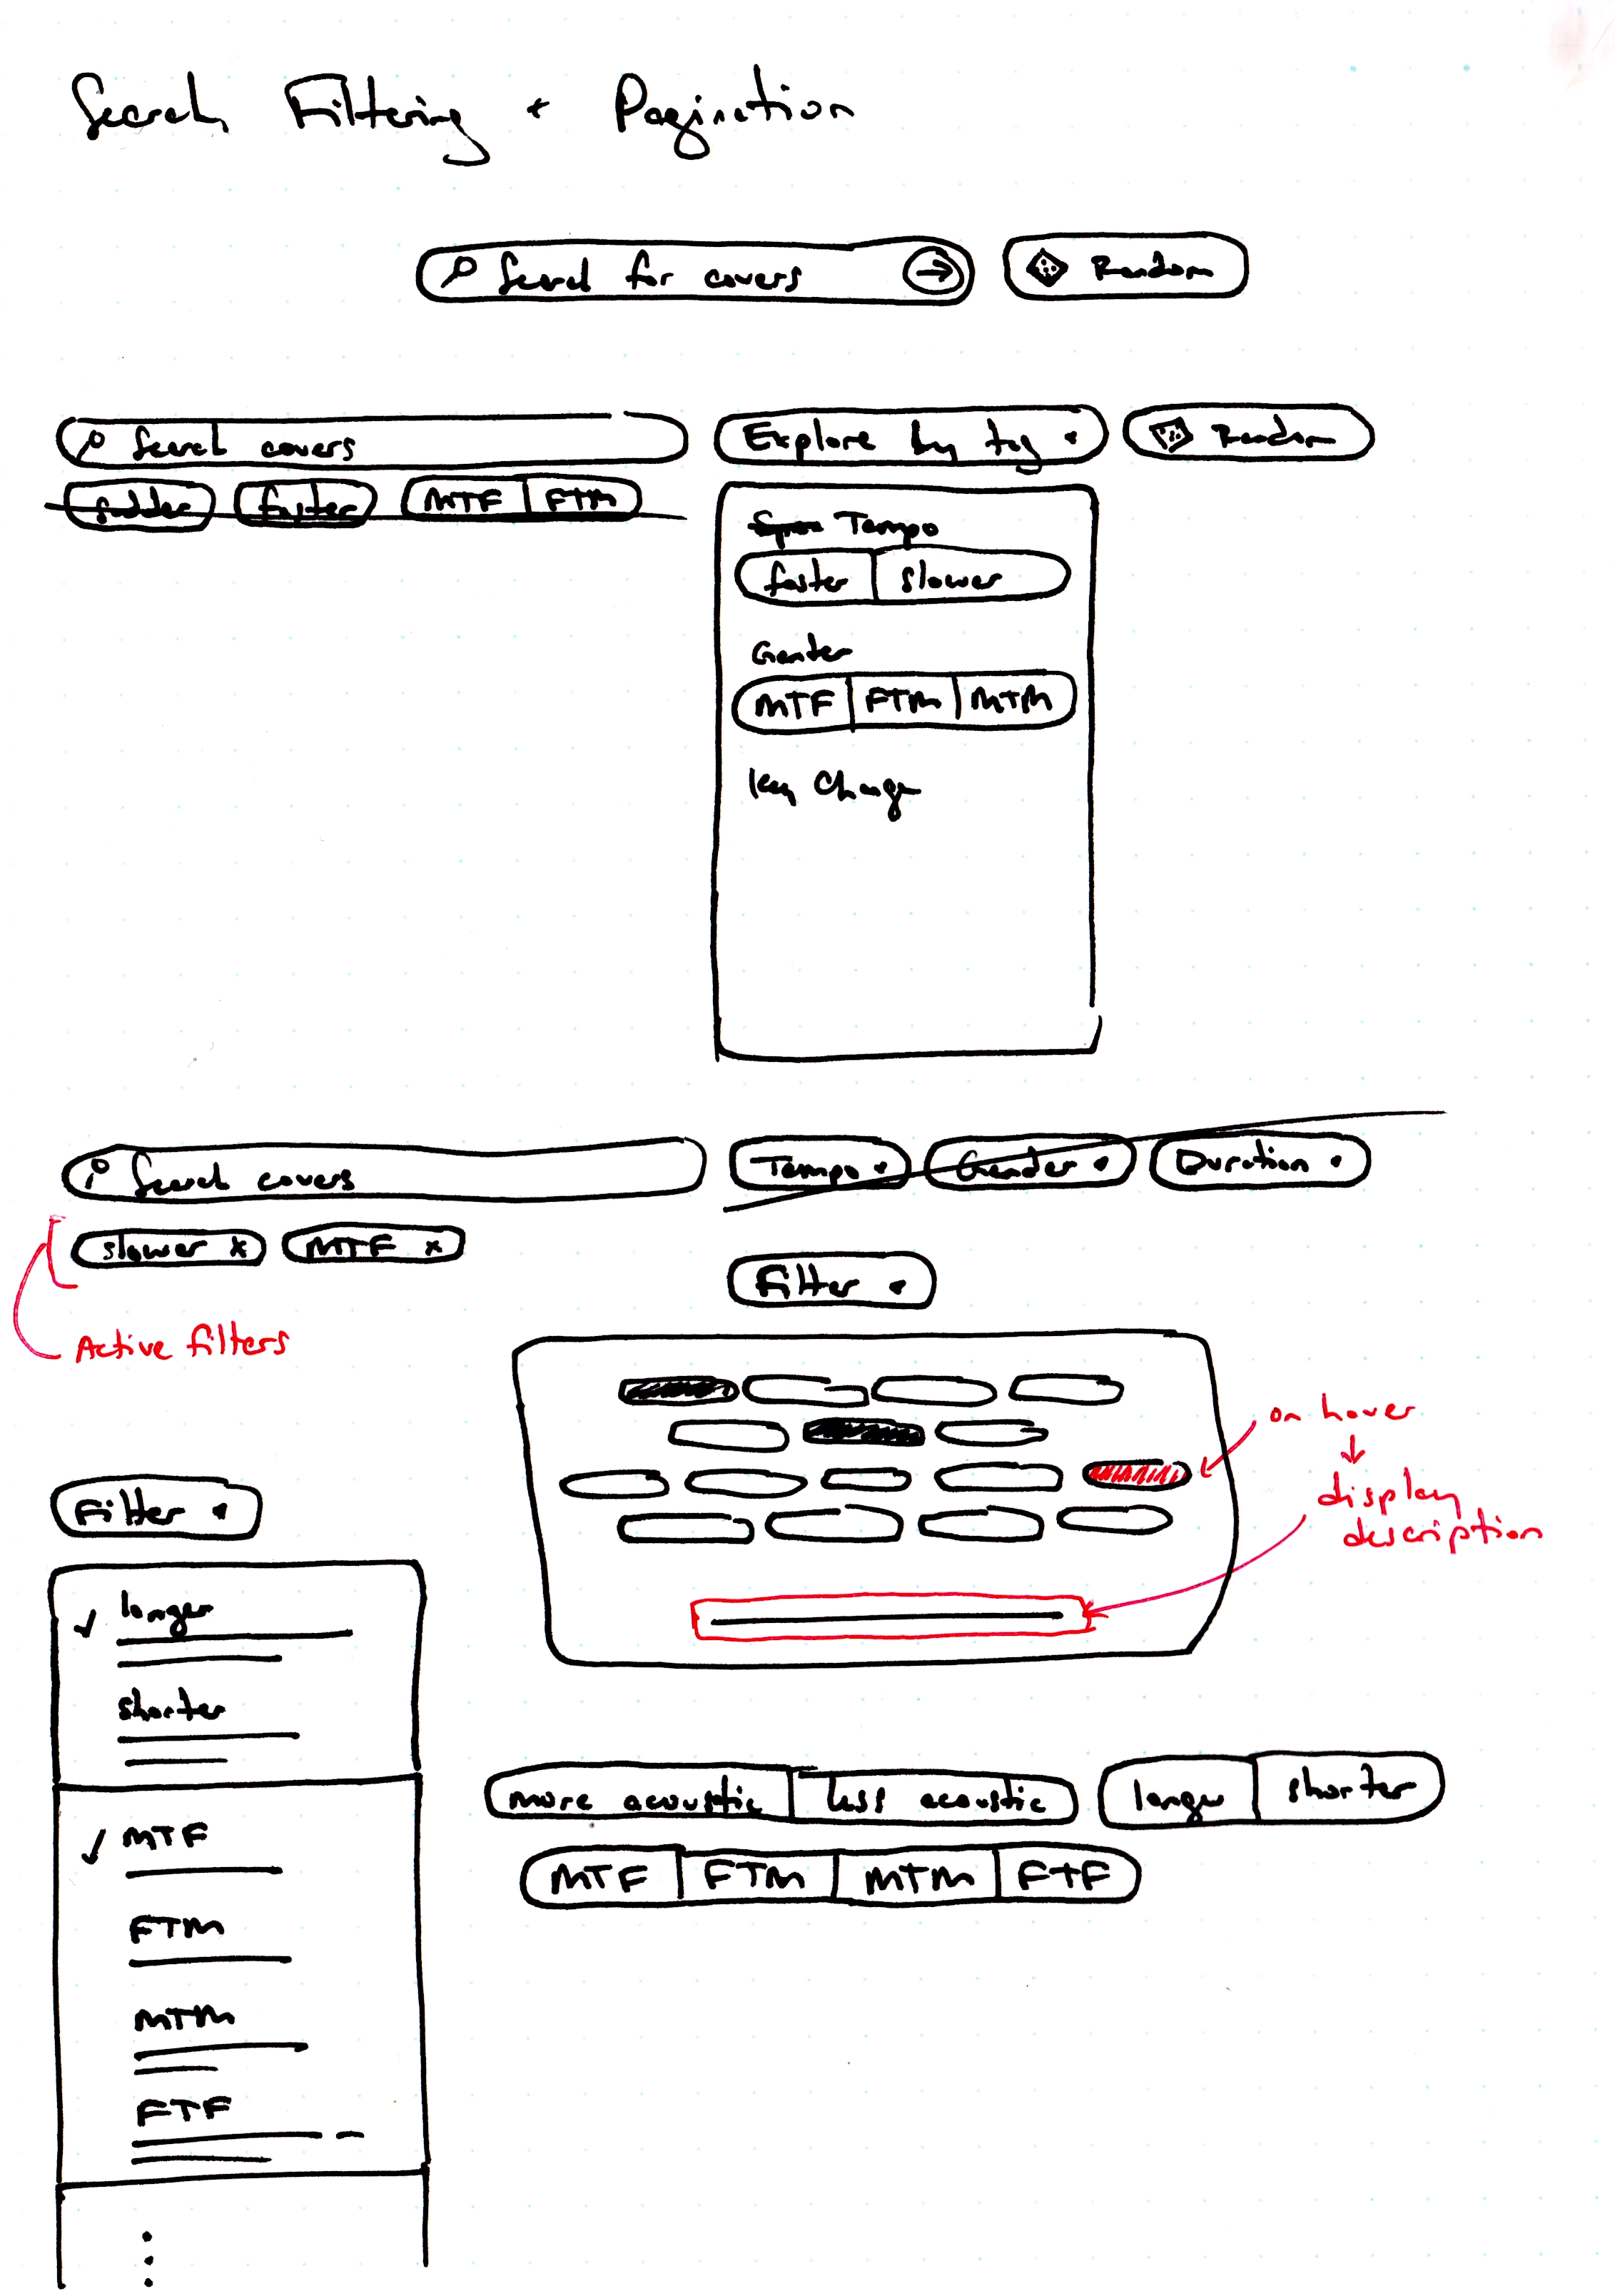 Search and filtering sketches.